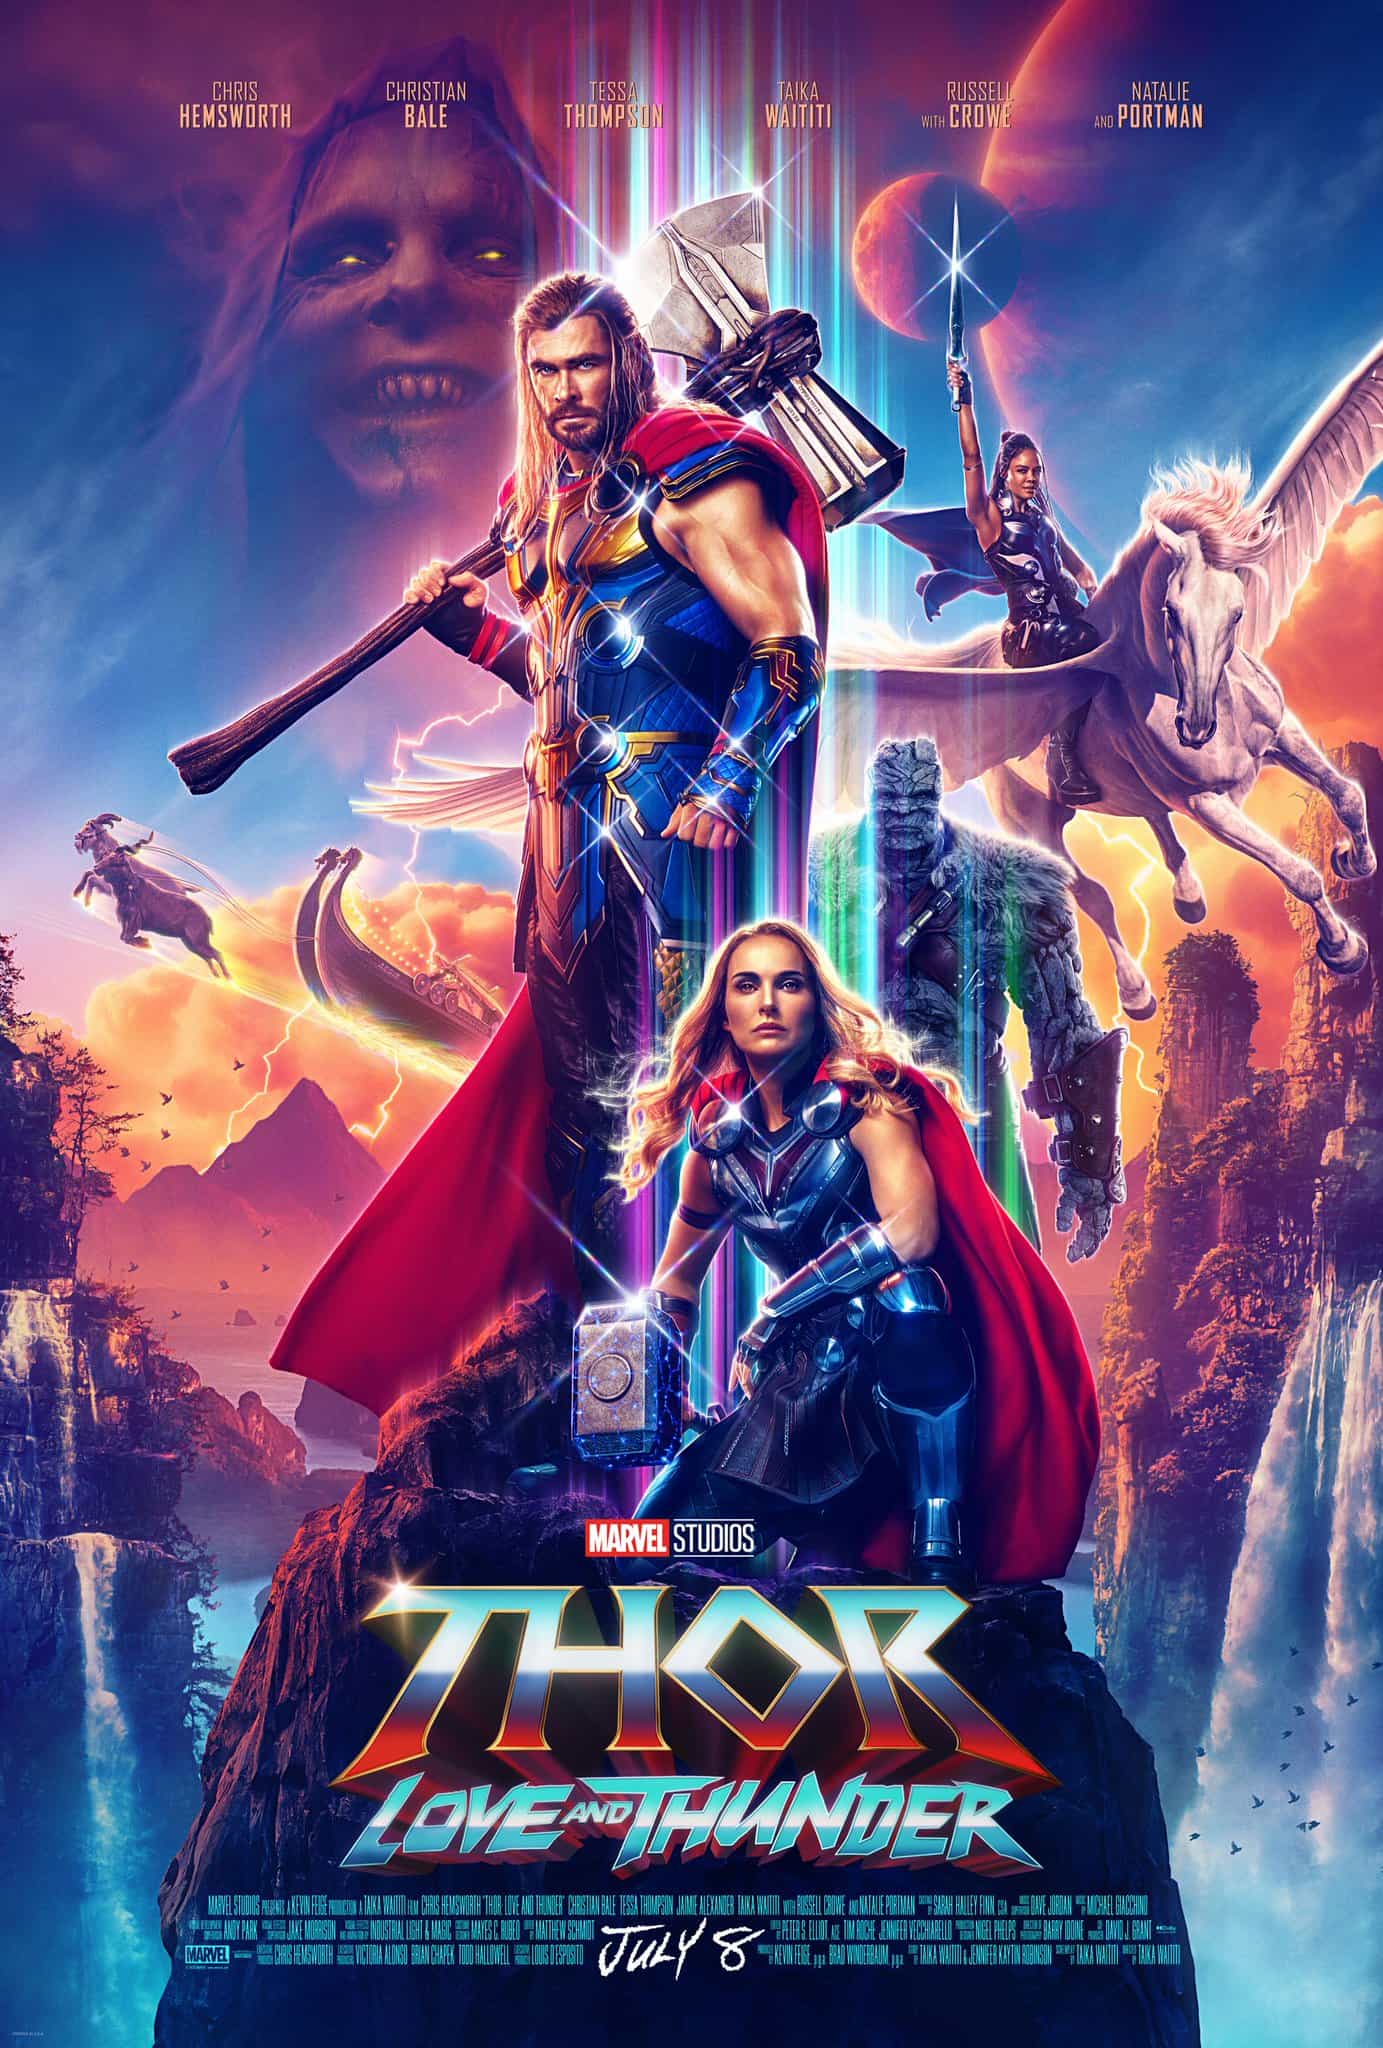 This weeks UK new movie preview 8th July 2022 - Thor: Love and Thunder and Brian and Charles - #thorloveandthunder #brianandcharles